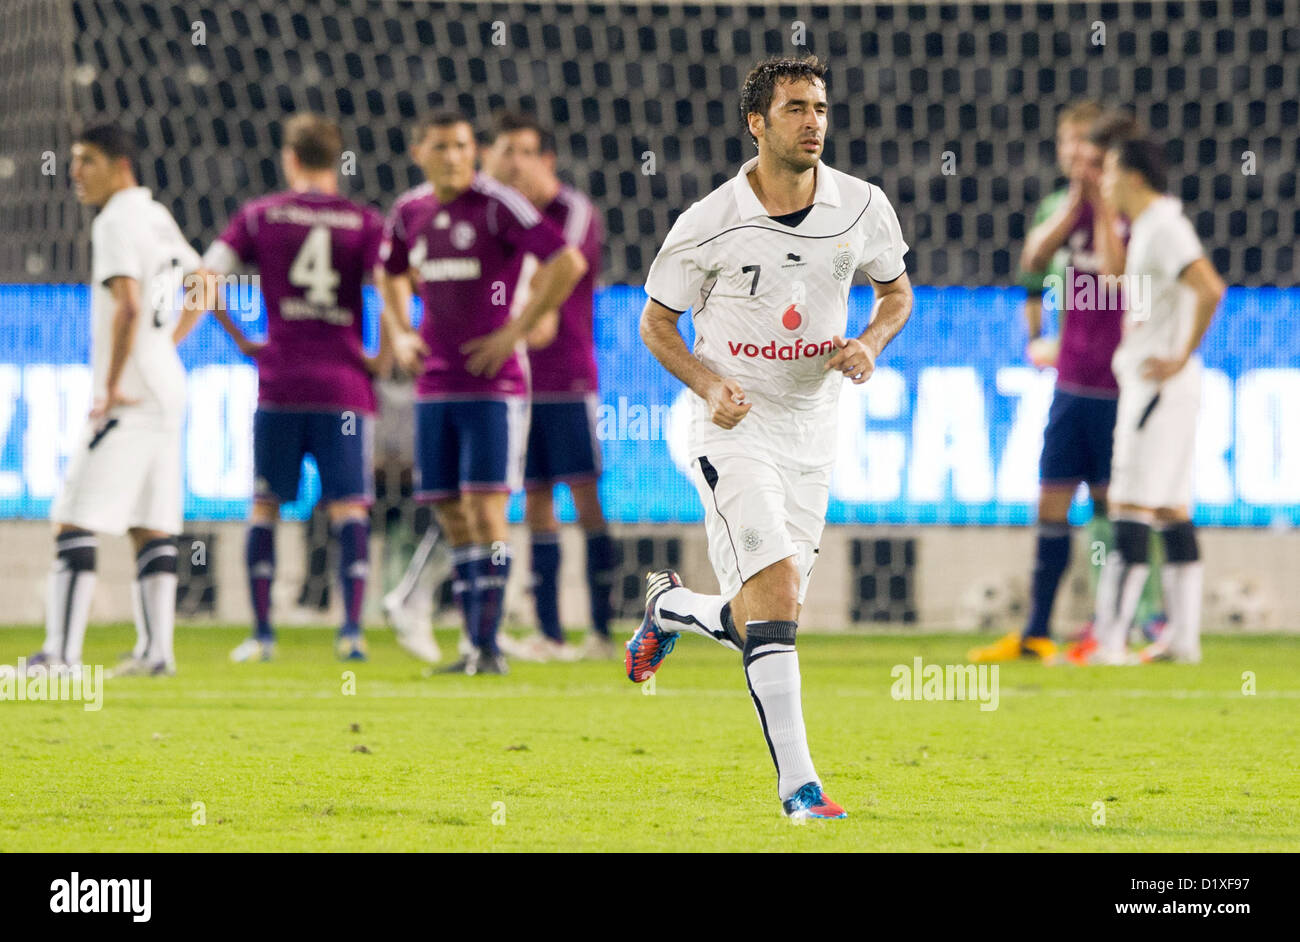 Soccer player Raul Gonzalez Blanco from Al-Sadd Sports Club performs during a test match against FC Schalke 04 in Doha, Qatar on January 06.01.2013. Schalke will stay in the Qatar-winter training camp until January 11.2013. Photo: Peter Kneffel/dpa Stock Photo